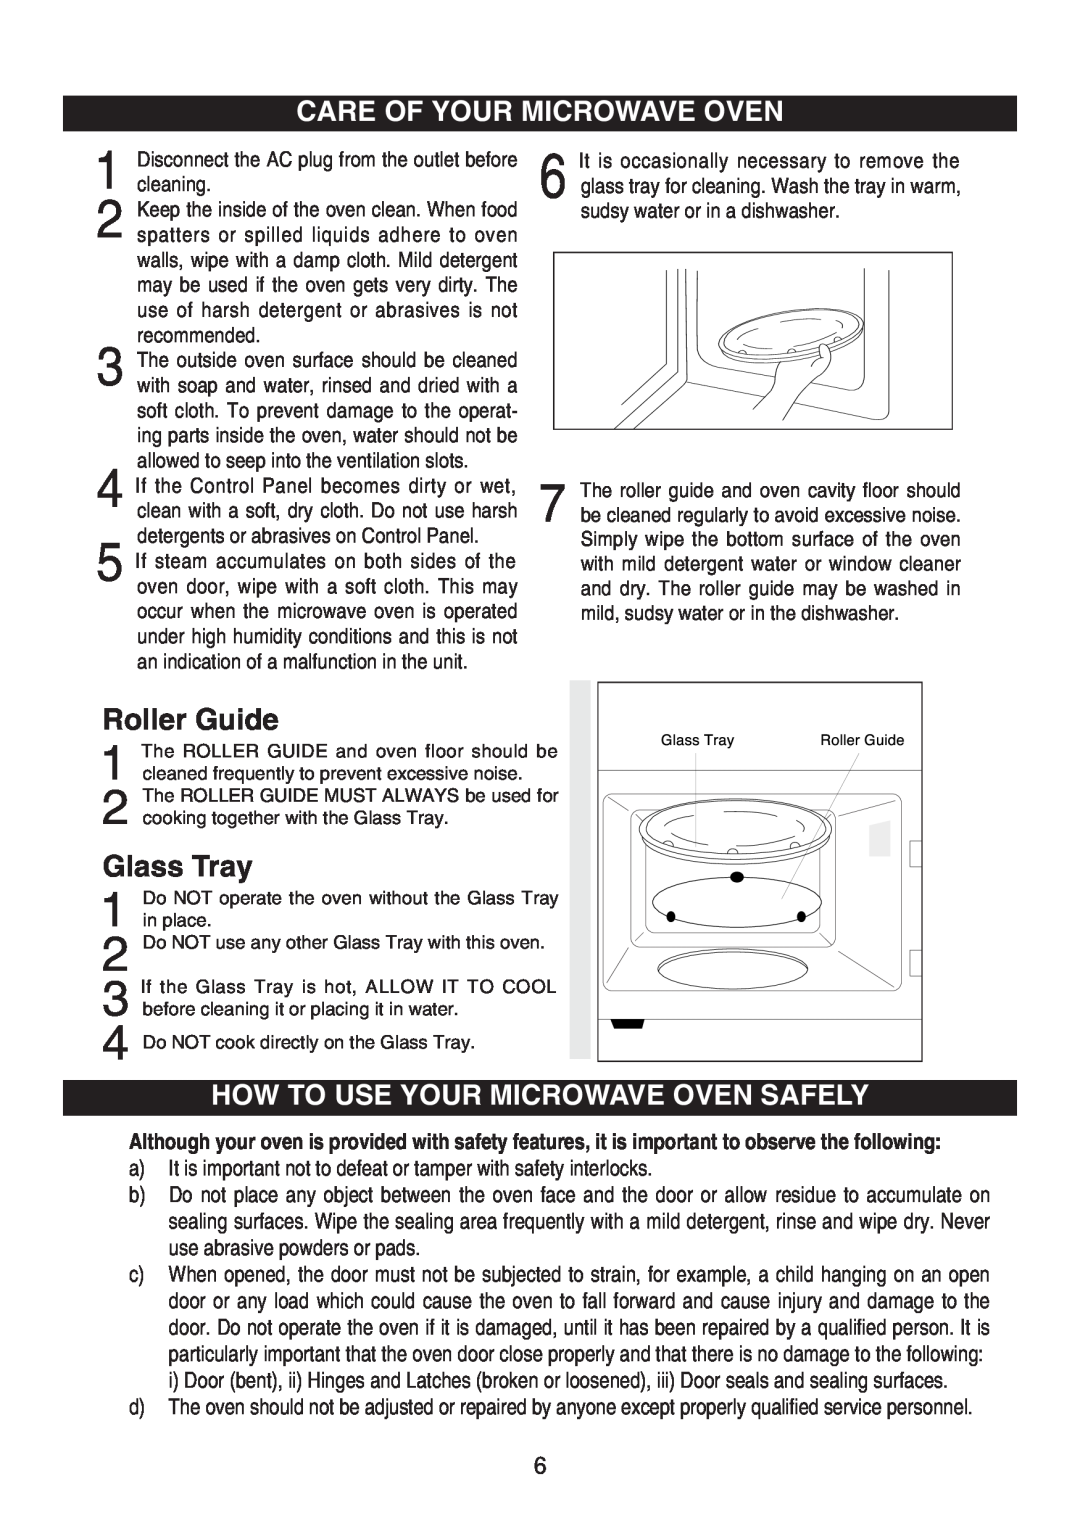 Emerson MW8991SB owner manual Care Of Your Microwave Oven, How To Use Your Microwave Oven Safely 